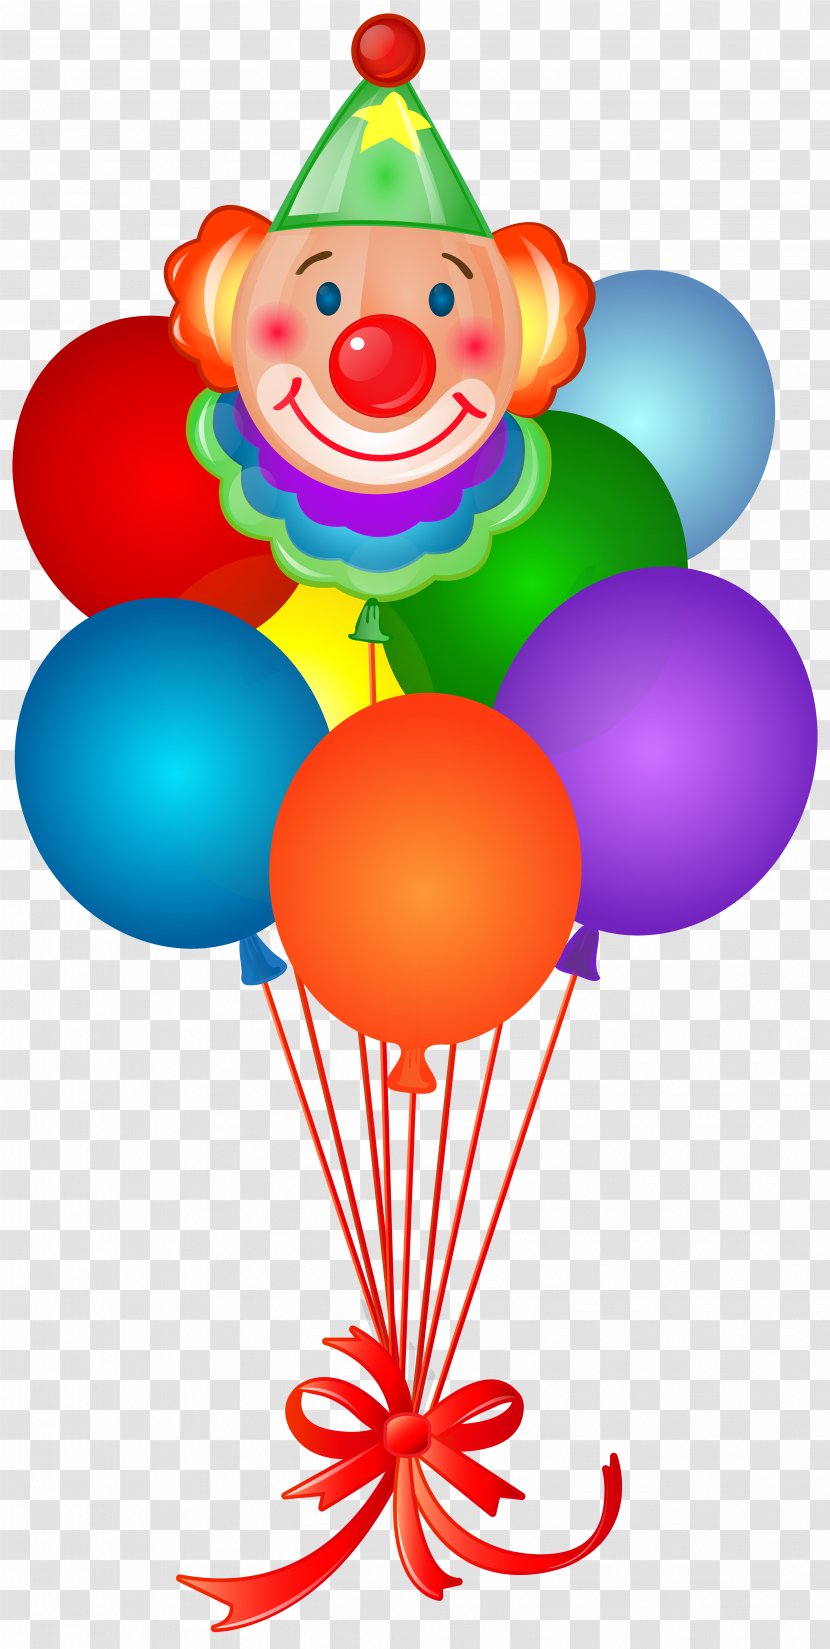 Birthday Cake Happy To You Balloon Party - Toy - Clown Transparent PNG